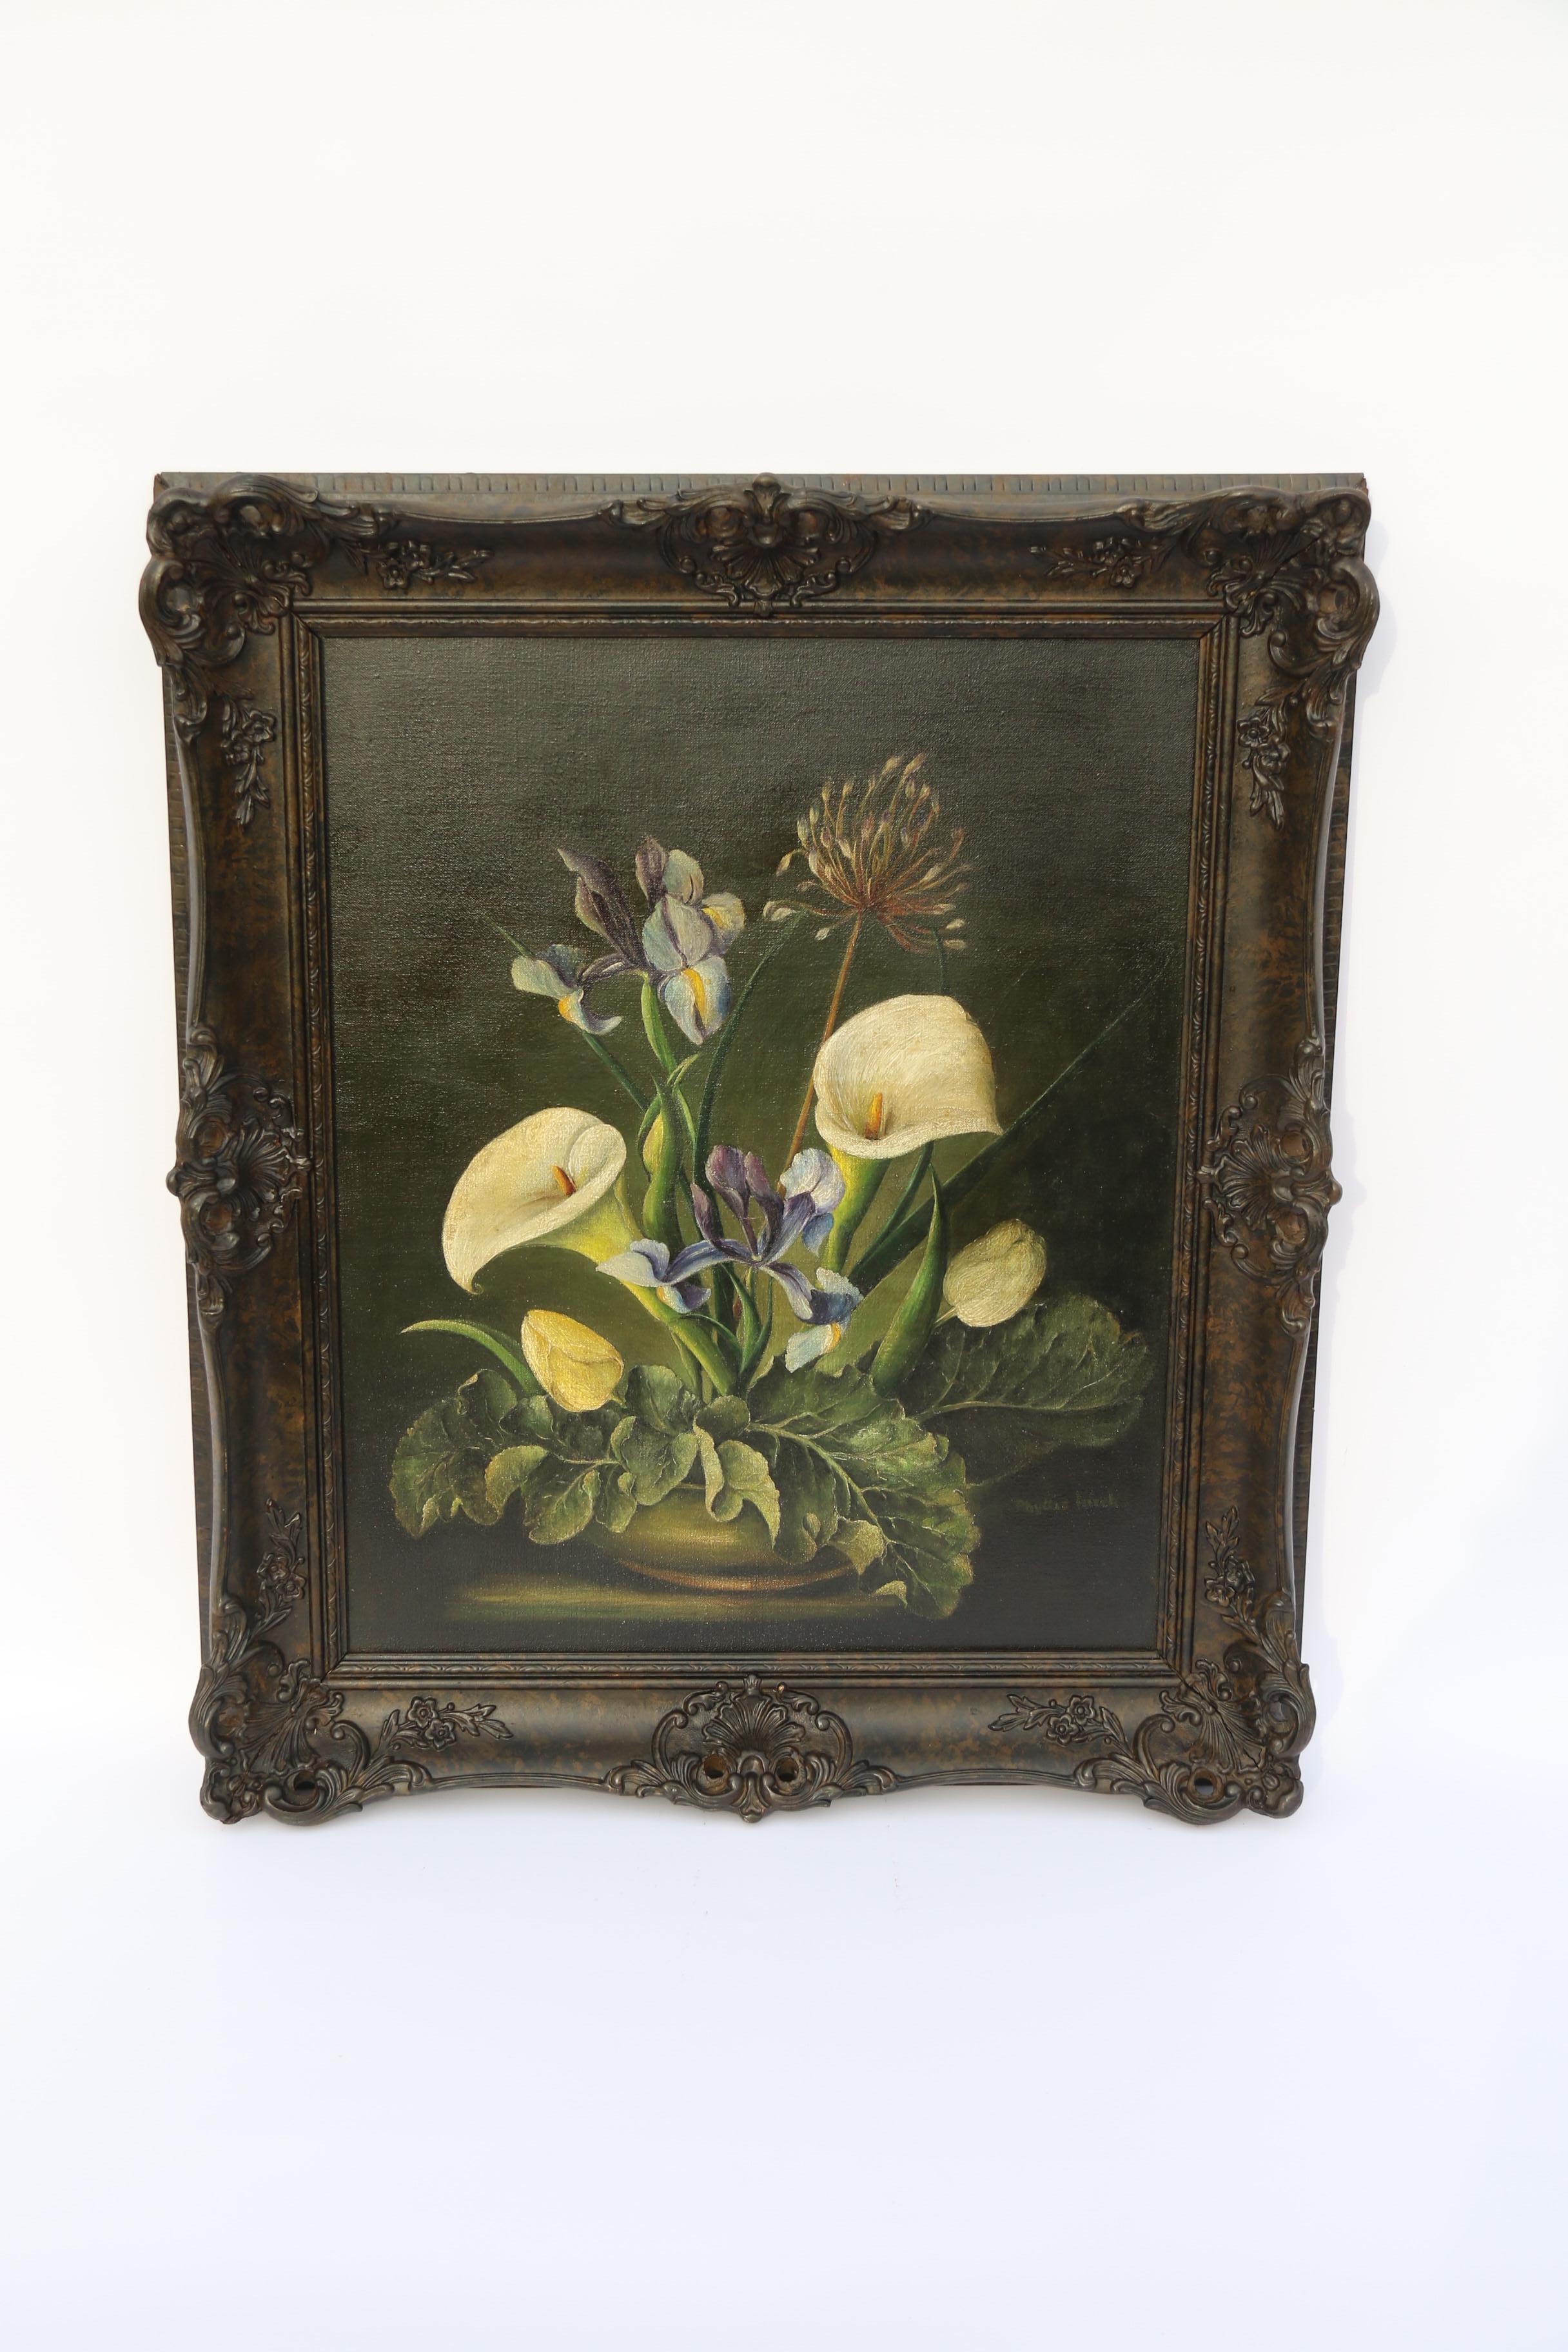 ,
This highly decorative mid 20th century oil on canvas follows the influence of the early 16th century Dutch artists with its dark atmospheric background and vibrant still life display of interesting flowers and foliage which include irises.,